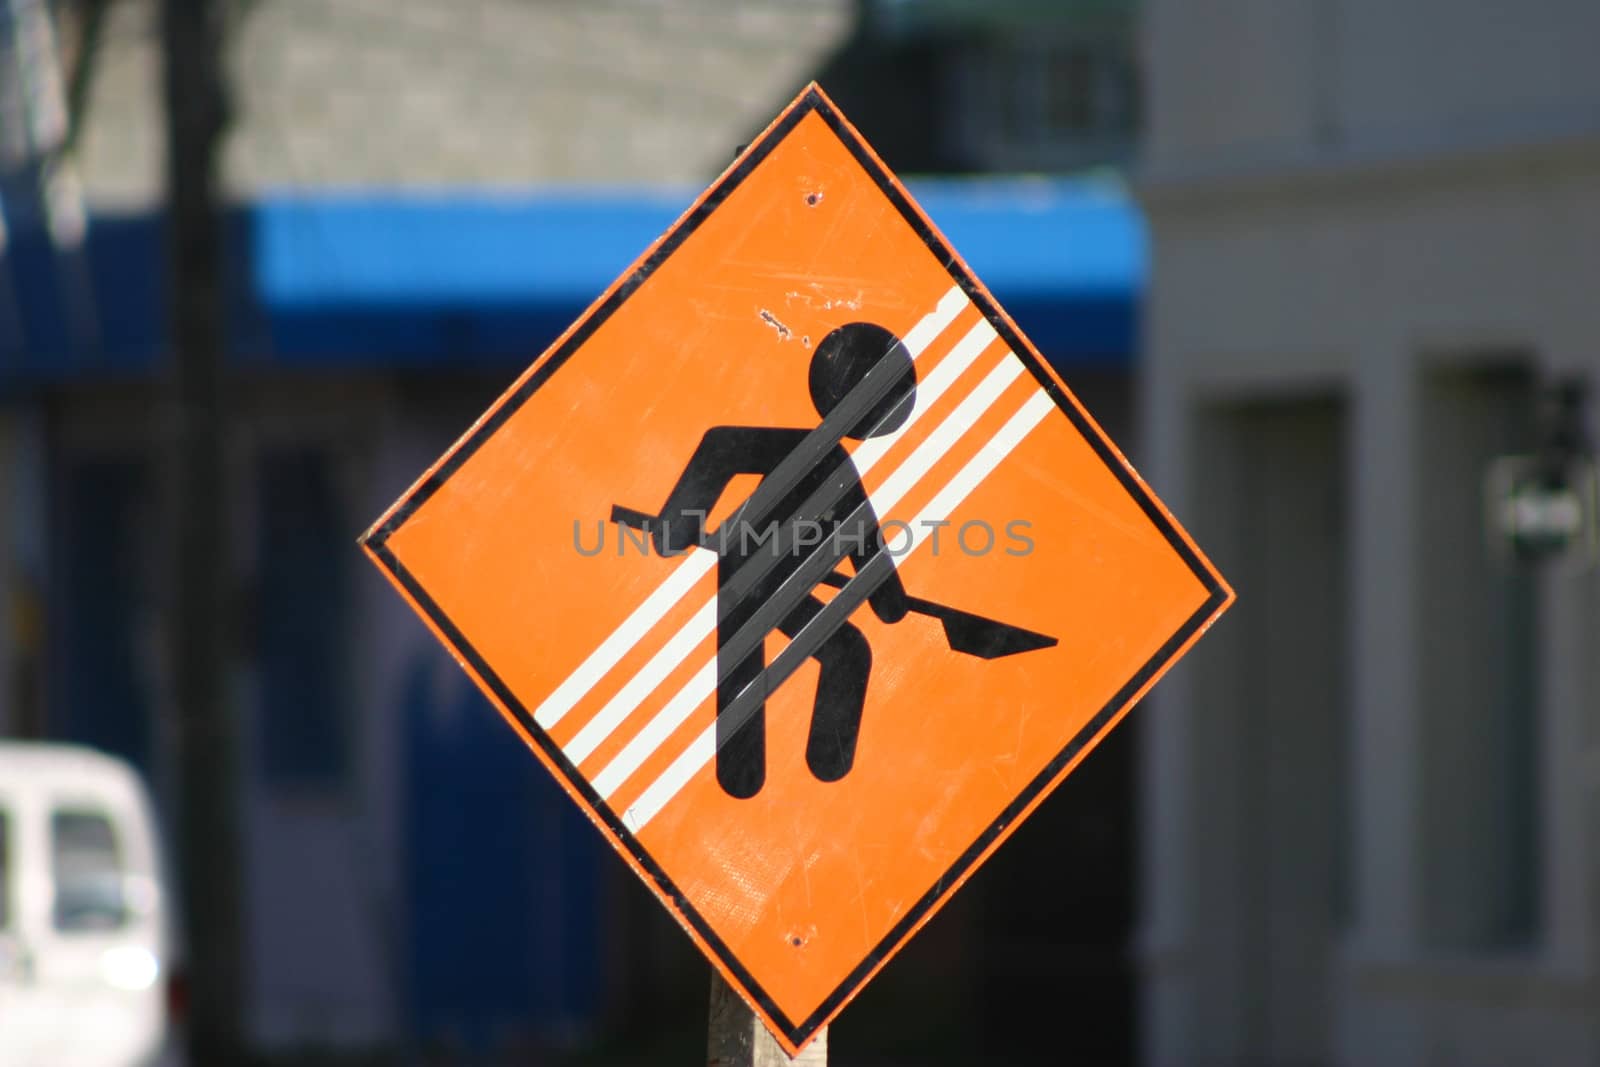 Under construction sign by watchtheworld